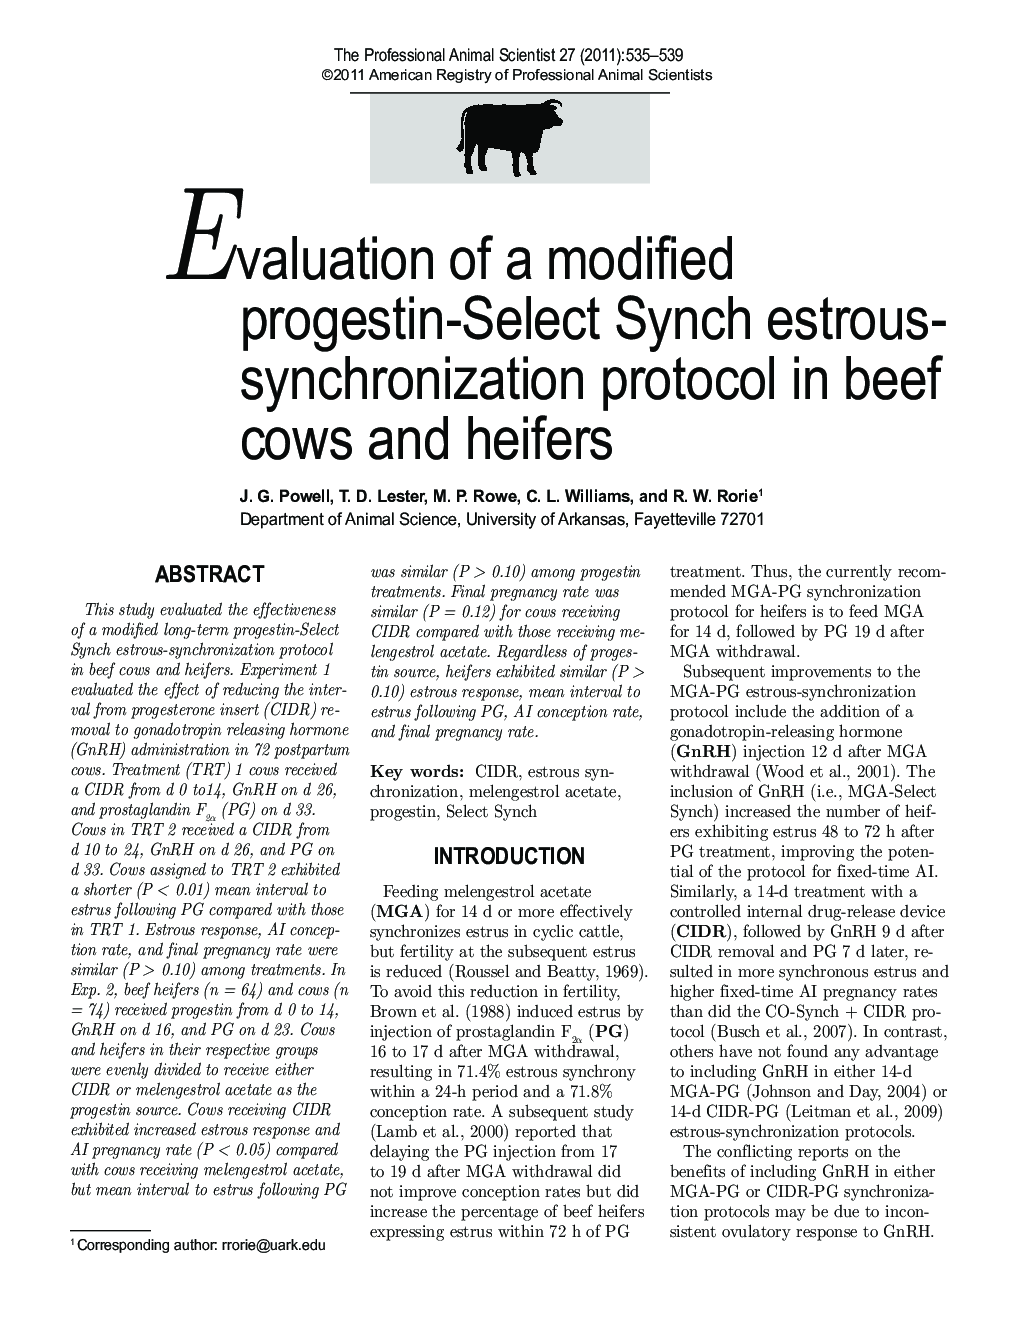 Evaluation of a modified progestin-Select Synch estrous-synchronization protocol in beef cows and heifers